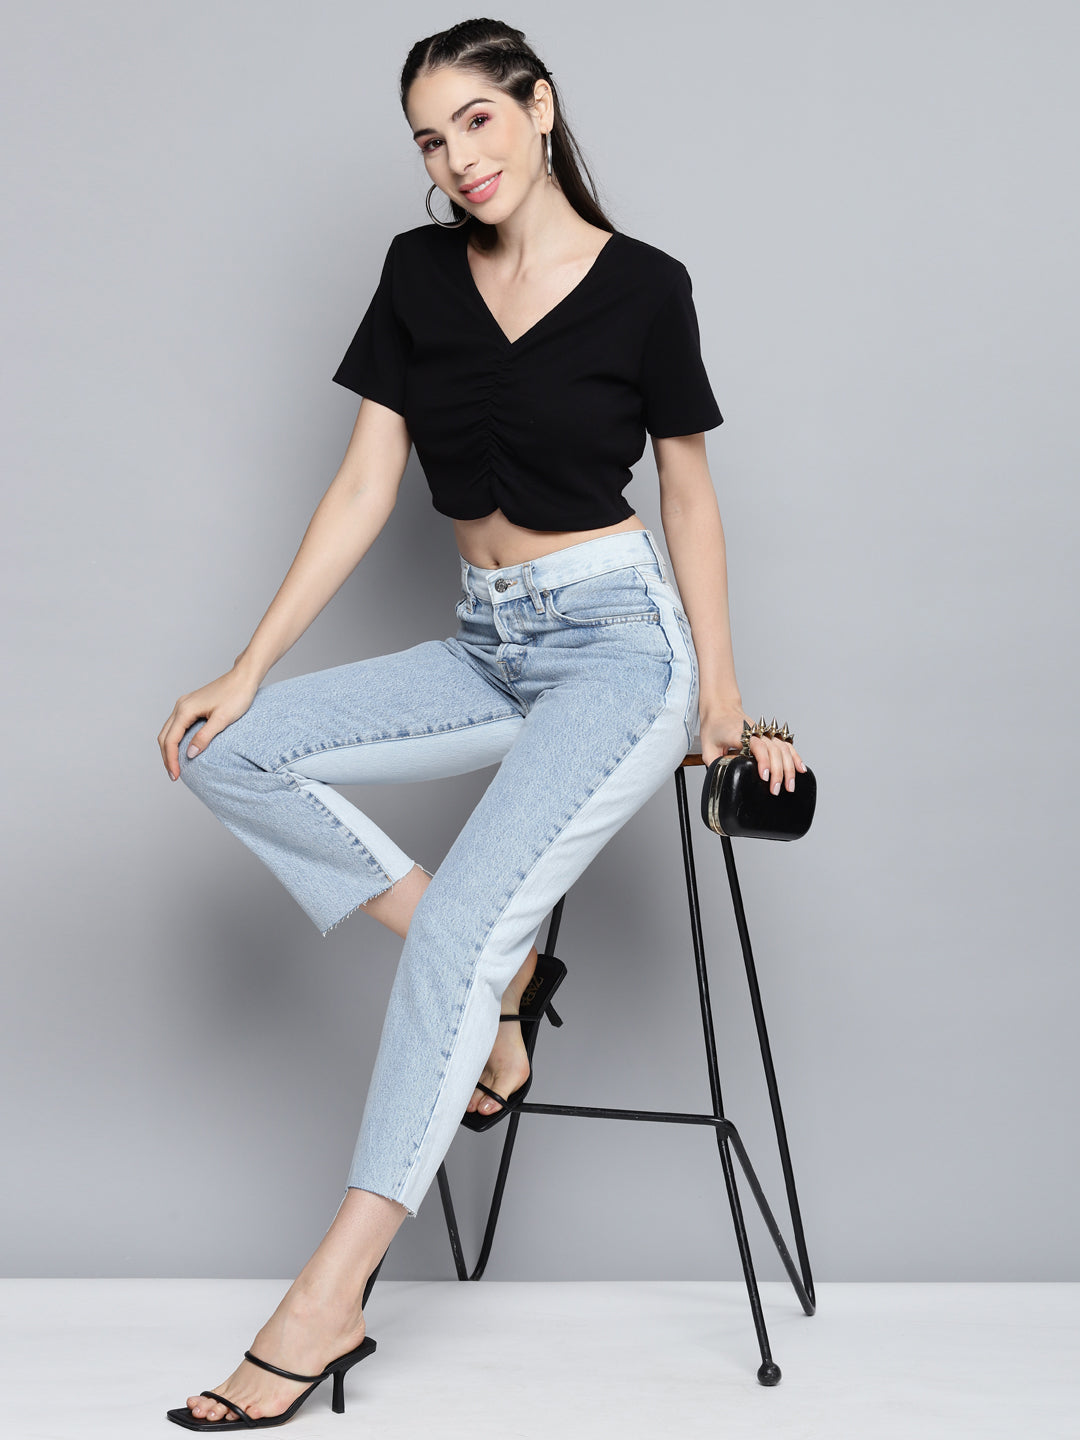 Black Ruched Front Rib Crop Top